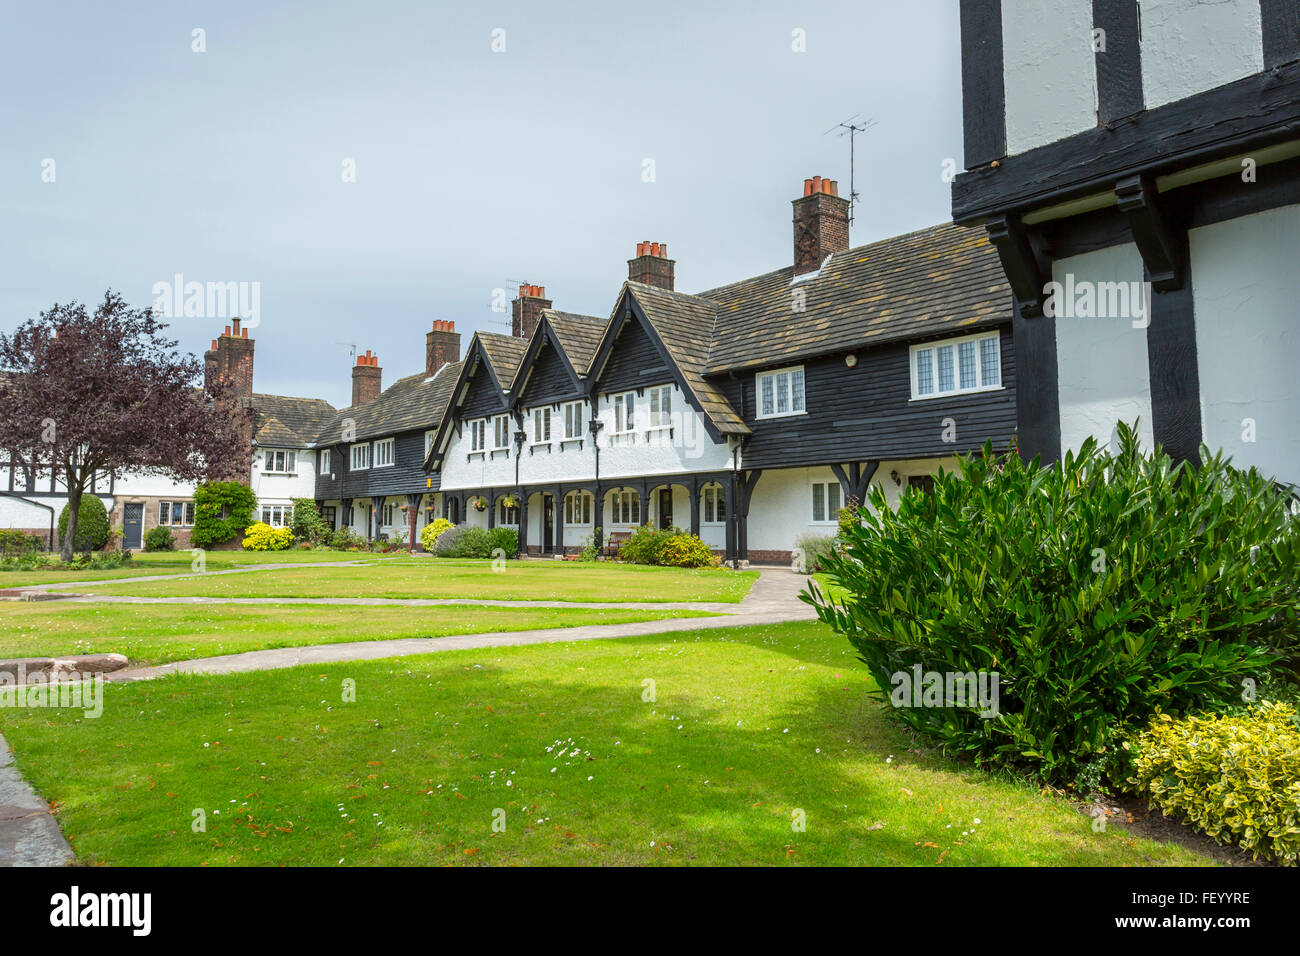 Attractive housing provided at Port Sunlight by William Lever, 1st Viscount Leverhulme. Stock Photo